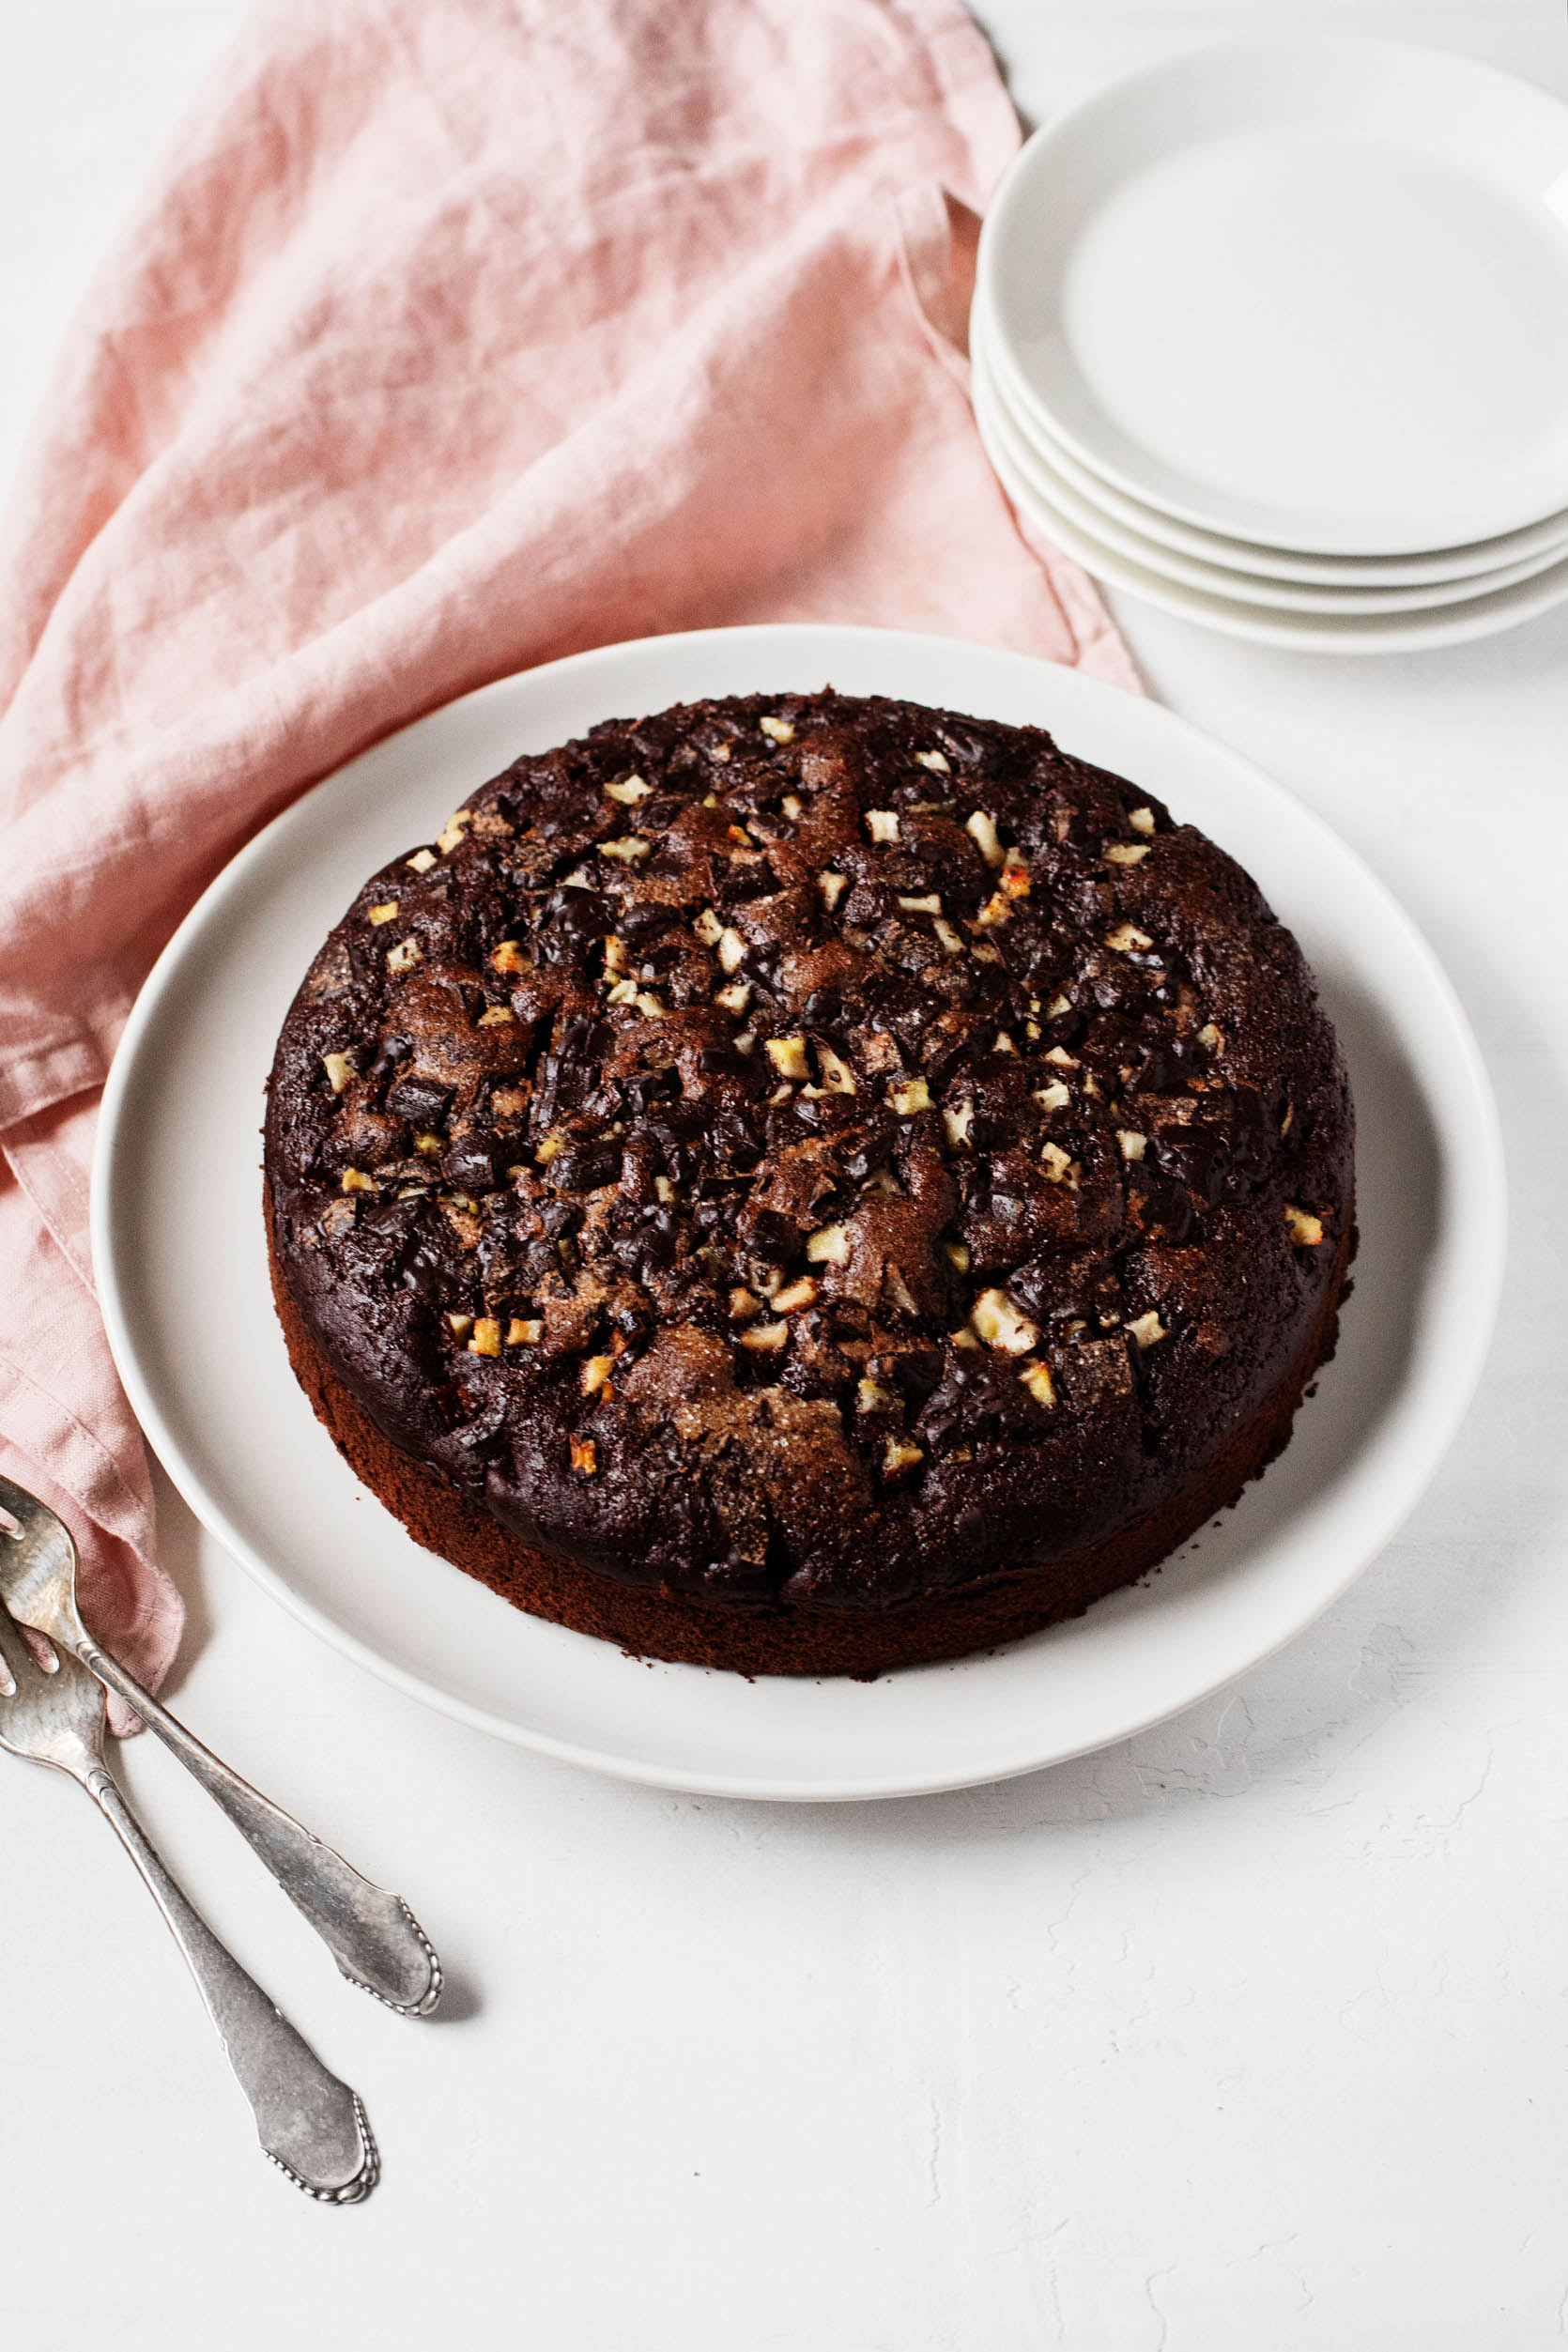 A round chocolate cake is ready to be served, with a stack of small dessert plates nearby.